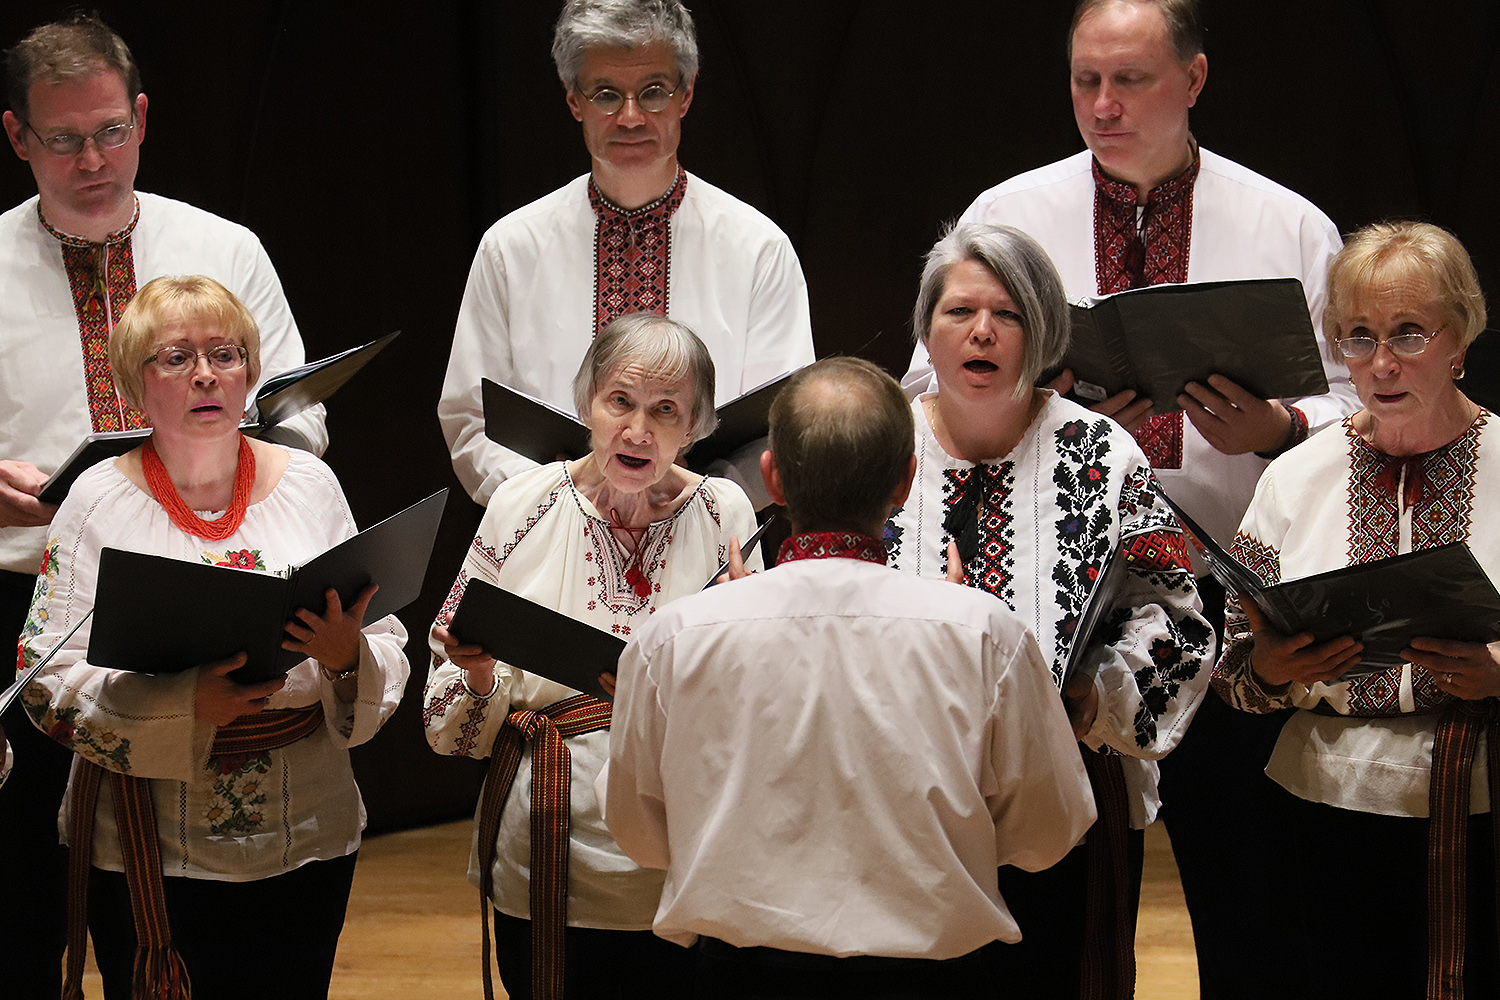 The Yevshan Ukrainian Vocal Ensemble of Hartford, a Connecticut-based Ukrainian community chorus, performed an original composition by its conductor, Alexander Kuzma, based on poem “On Bald Mountain" by Vasyl Stus. Stus, a human rights activist and political prisoner from the Donetsk Region of Ukraine, died in the Soviet Gulag in 1985. Donetsk State University was renamed in honor of Stus in the late 2000s, but since the Russian invasion of Donetsk in 2014, Stus’s name has been removed from the campus.